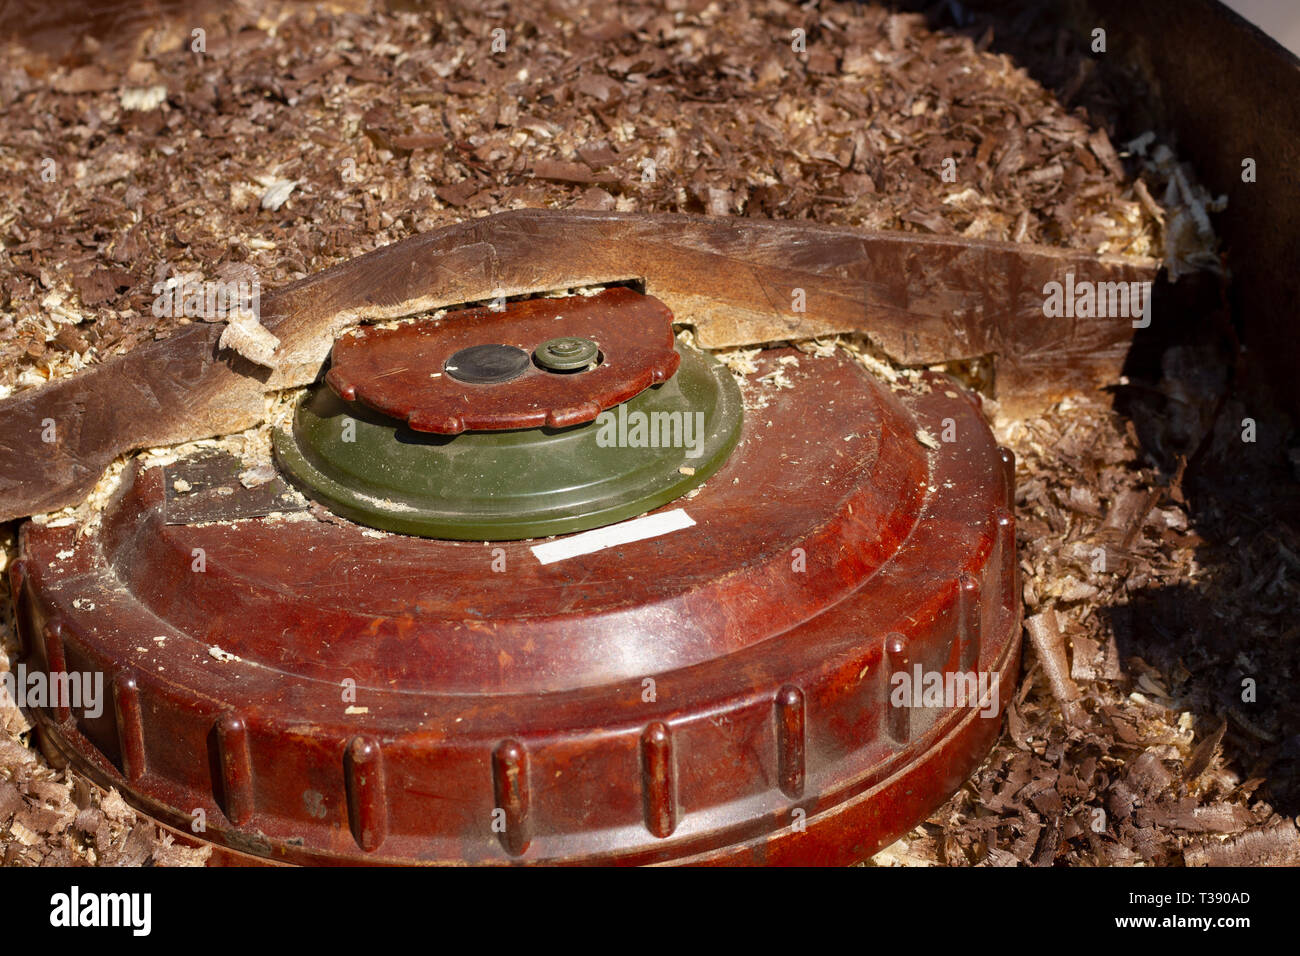 A mock training anti-tank mines. The device and the principle of the powerful anti-tank mines. An explosive device against heavy military equipment. Stock Photo